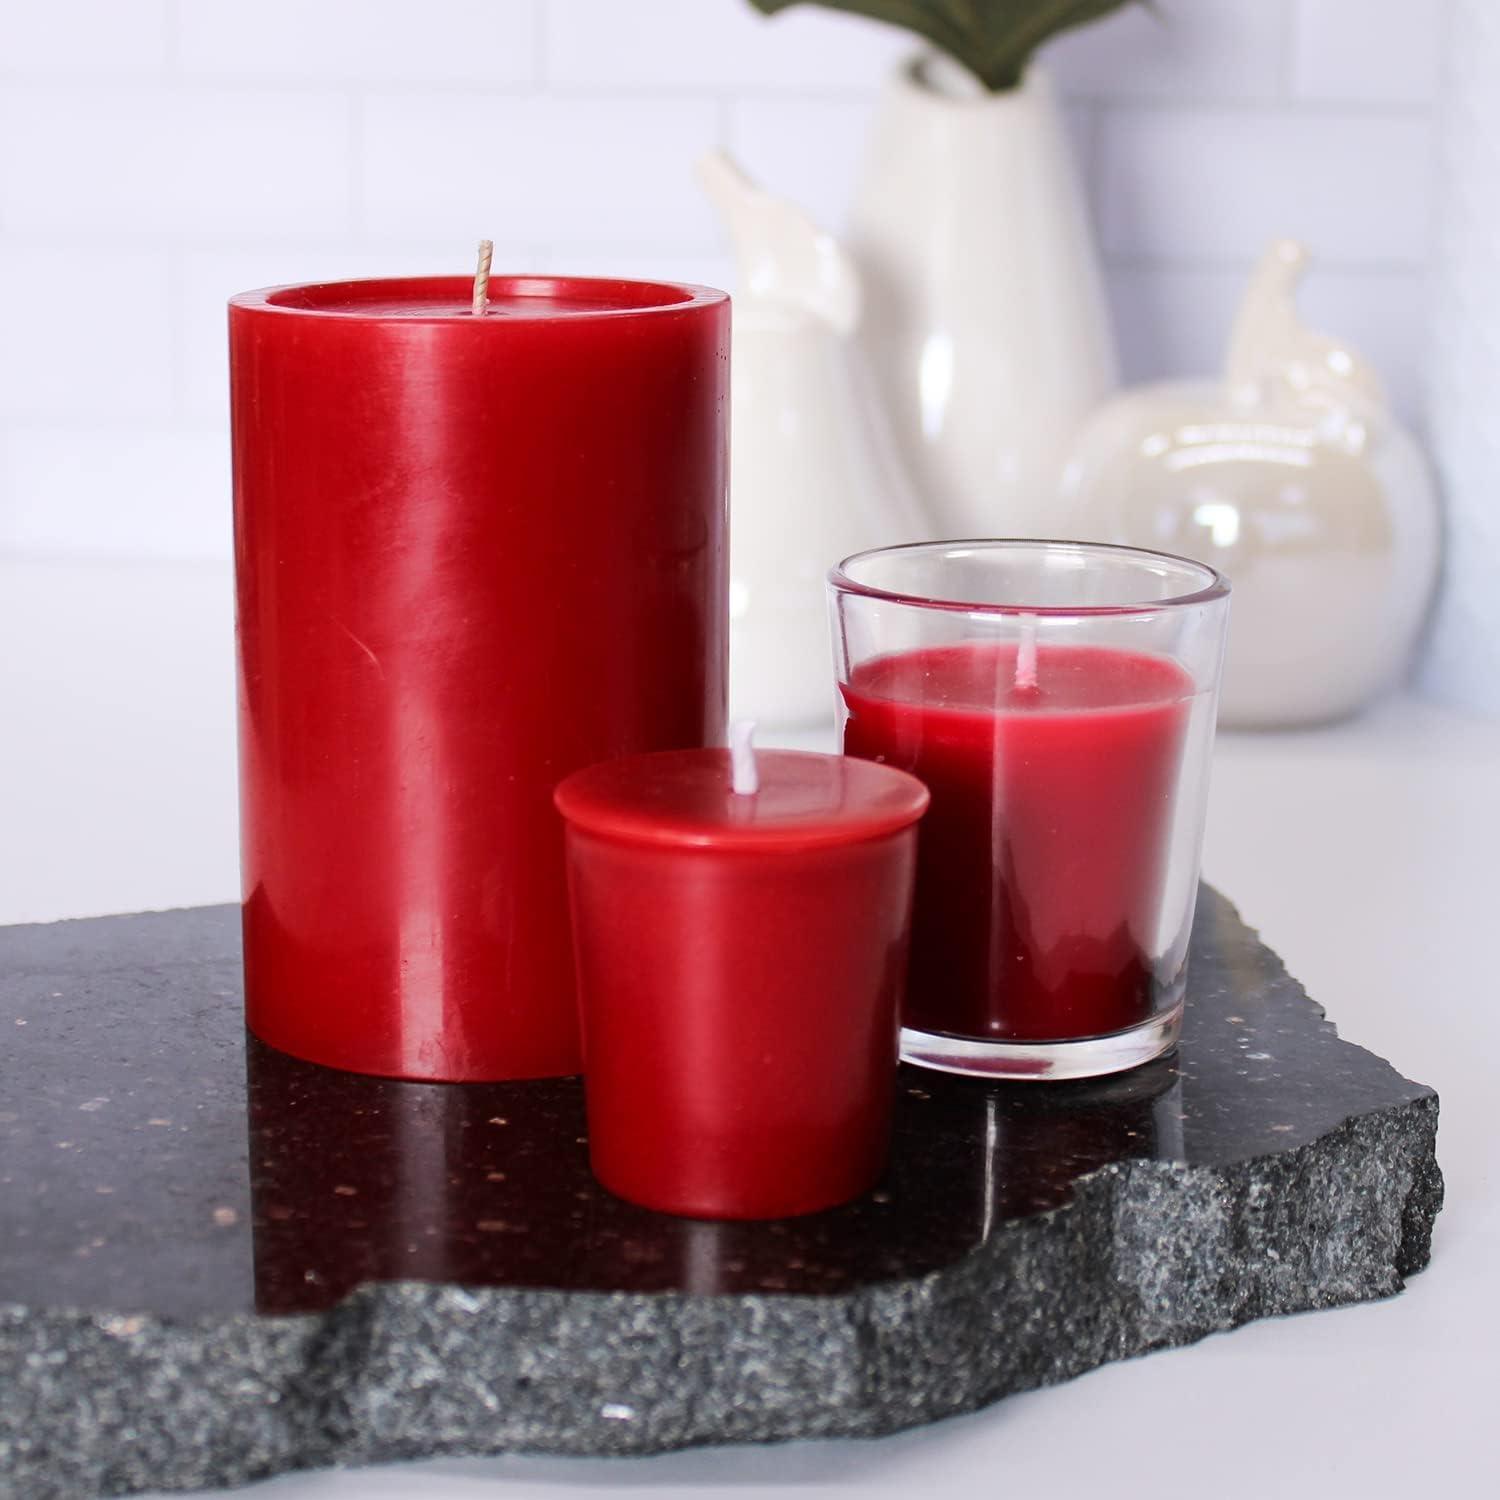 Digital Thermometer Candles, Paraffin Wax Candle Making